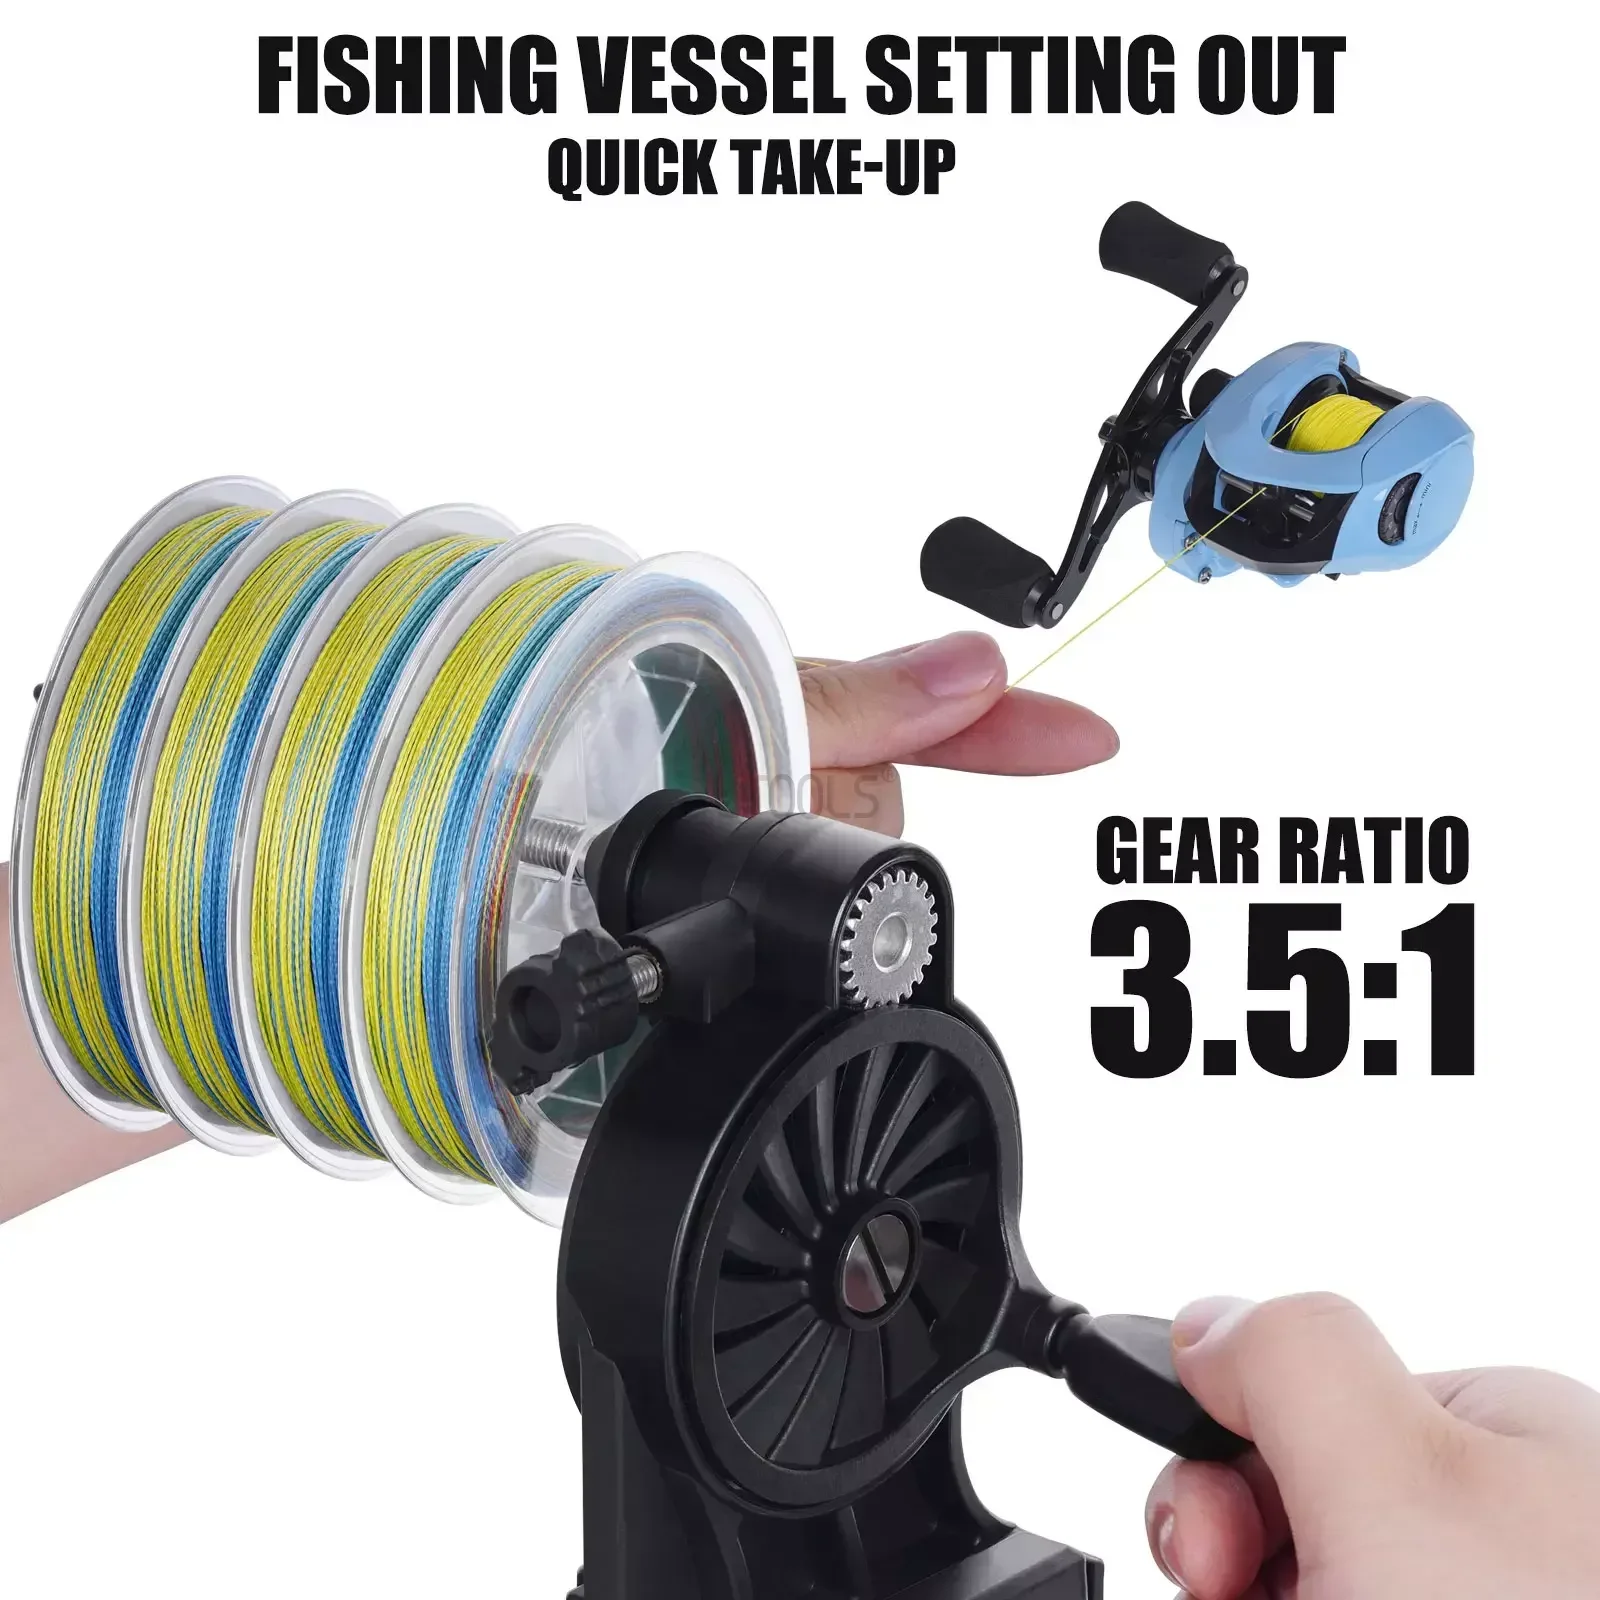 New Fishing Line Spooler for Baitcasting Spinning Reel Portable Fishing  Line Winder Machine Reel Spooler Fishing Tackle Tools